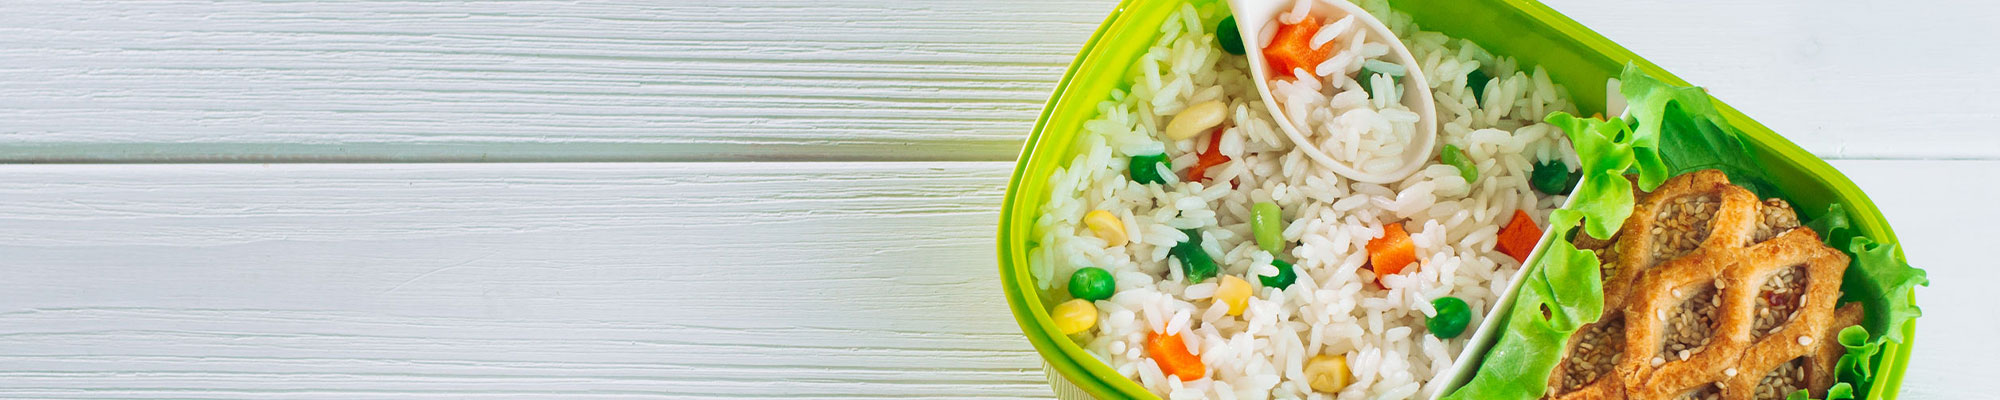 Banner Image of a school lunch with rice.